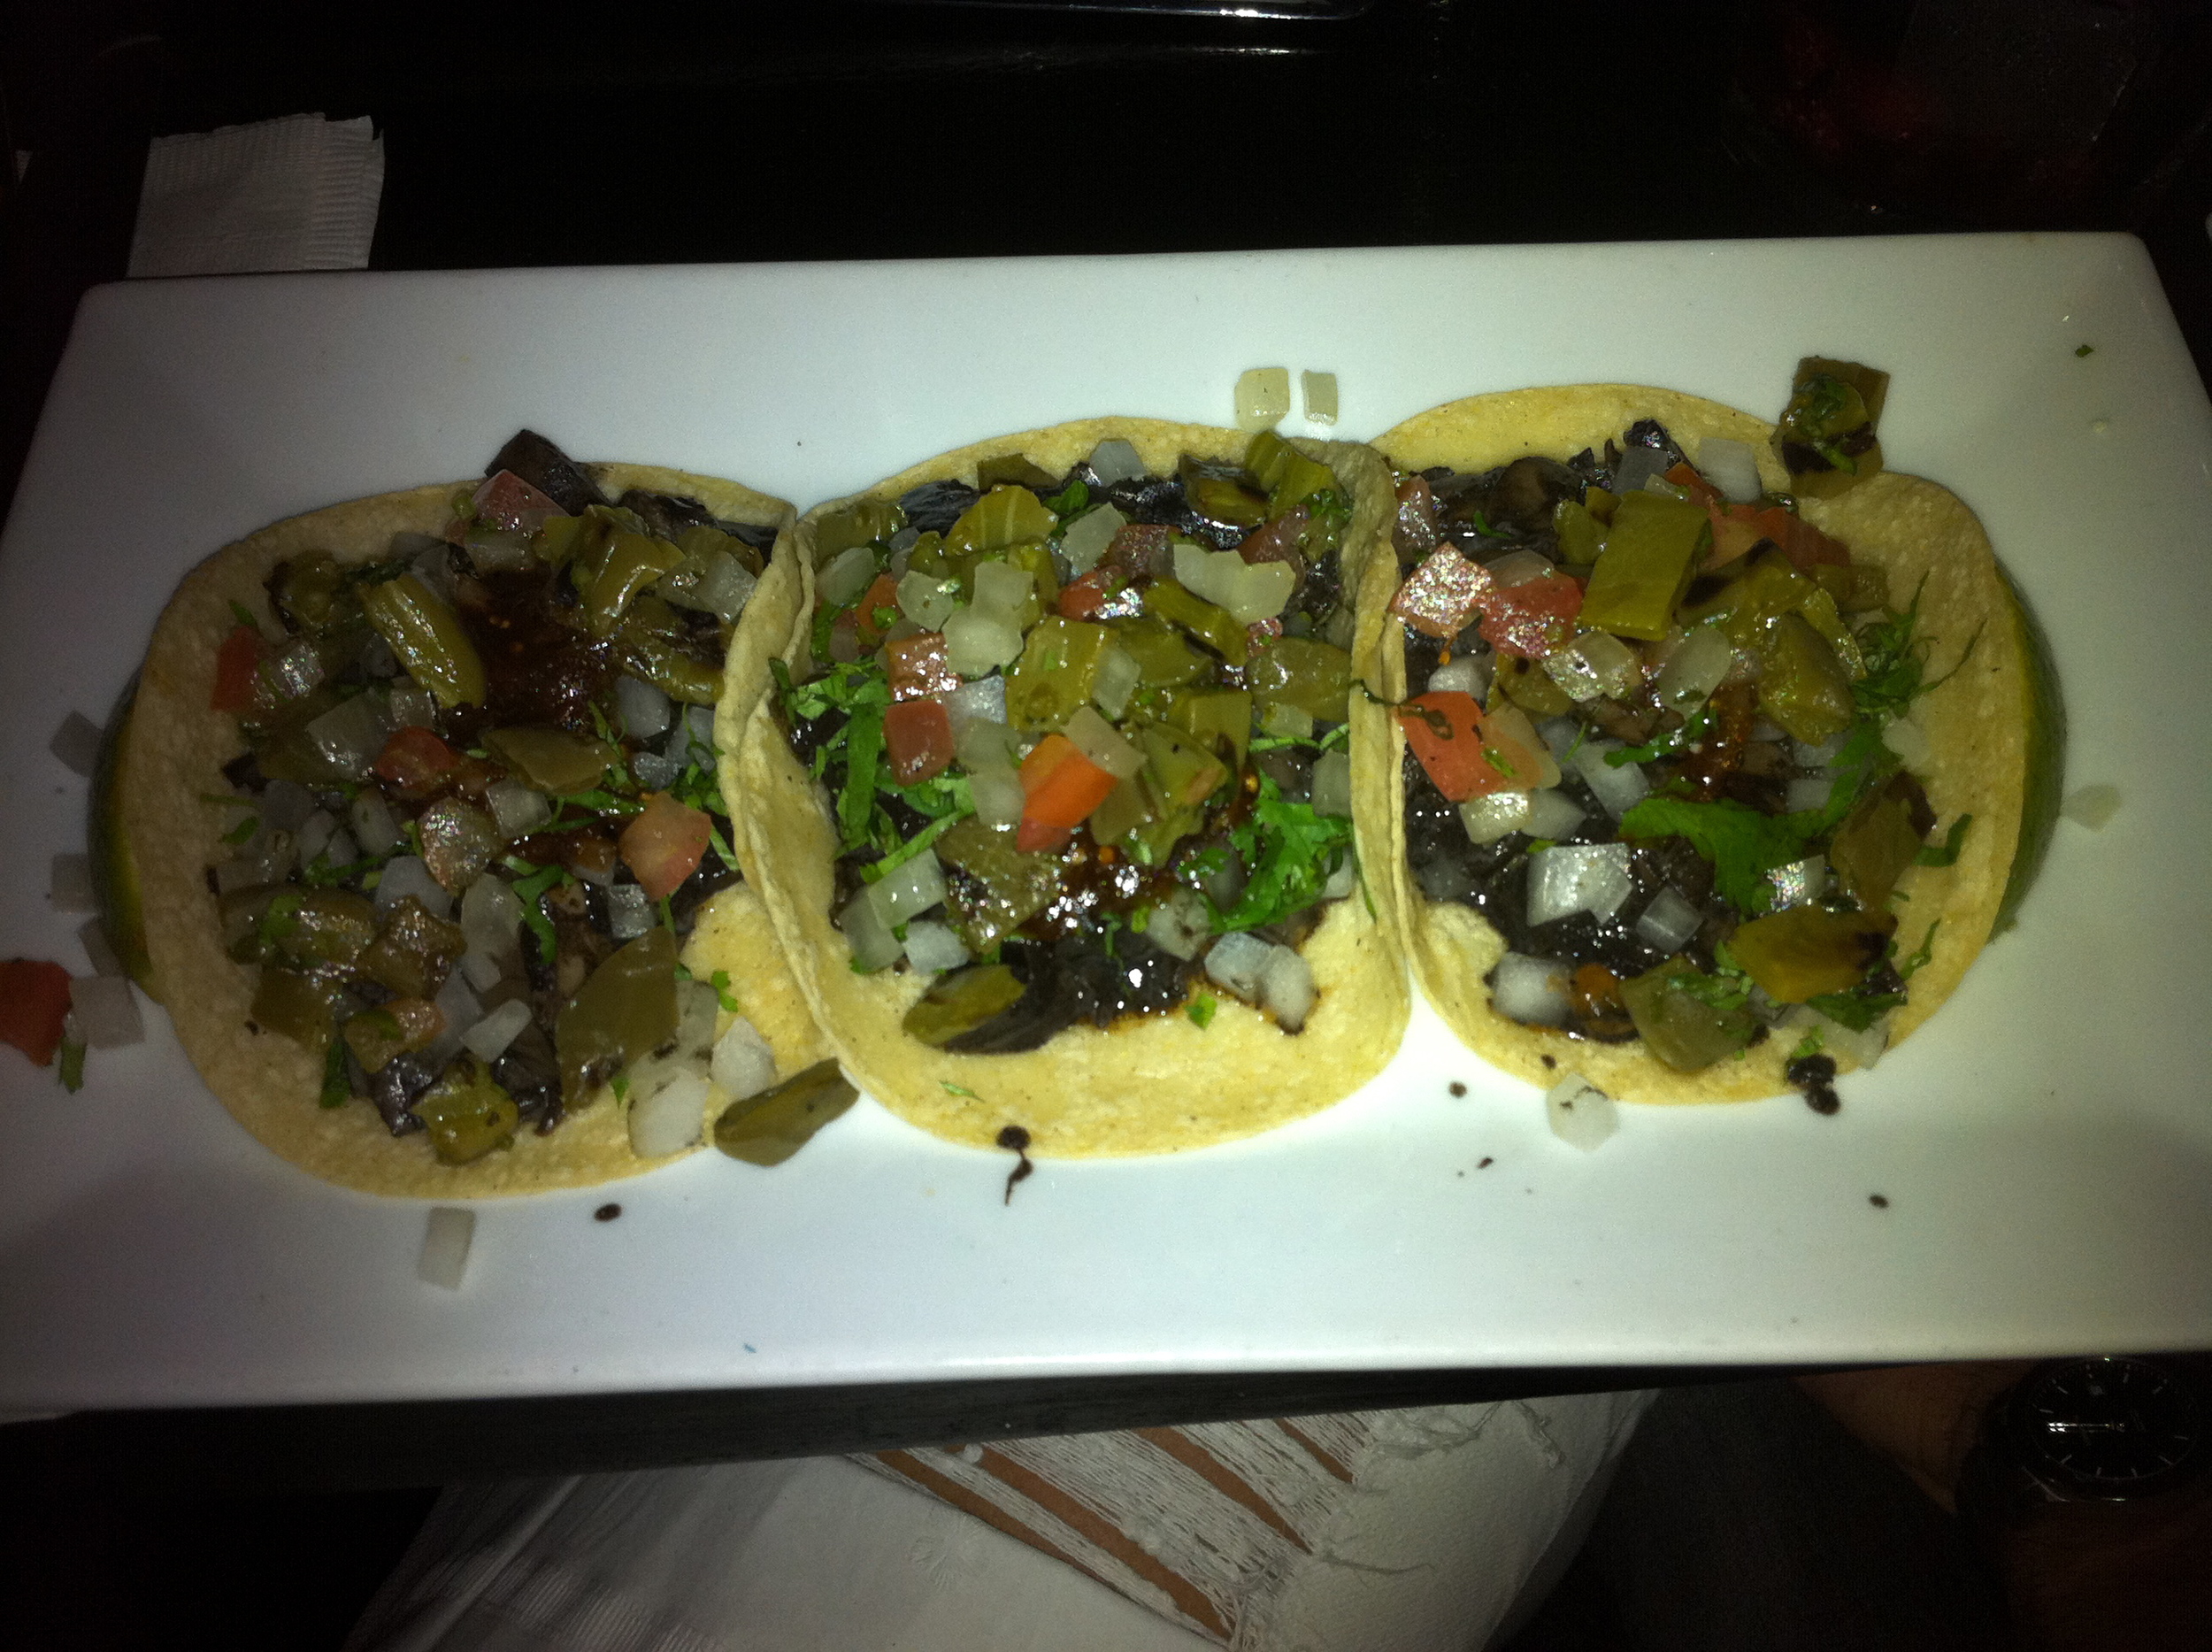 Mushroom tacos are maybe our favorite choice at mexican restaurants and they're totally vegan!